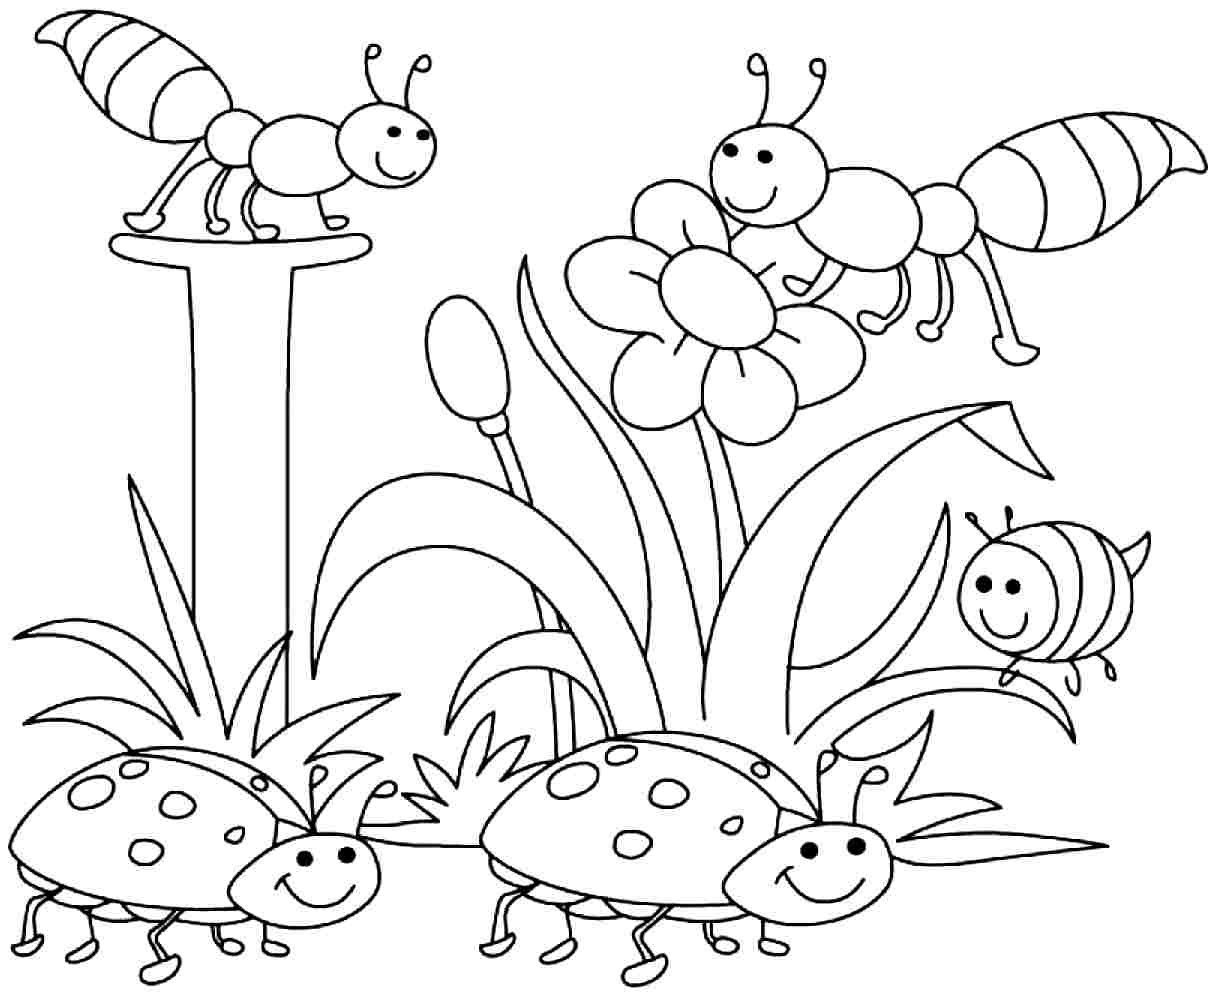 Coloring Pages For Kids Spring
 Printable Coloring pages spring spring coloring